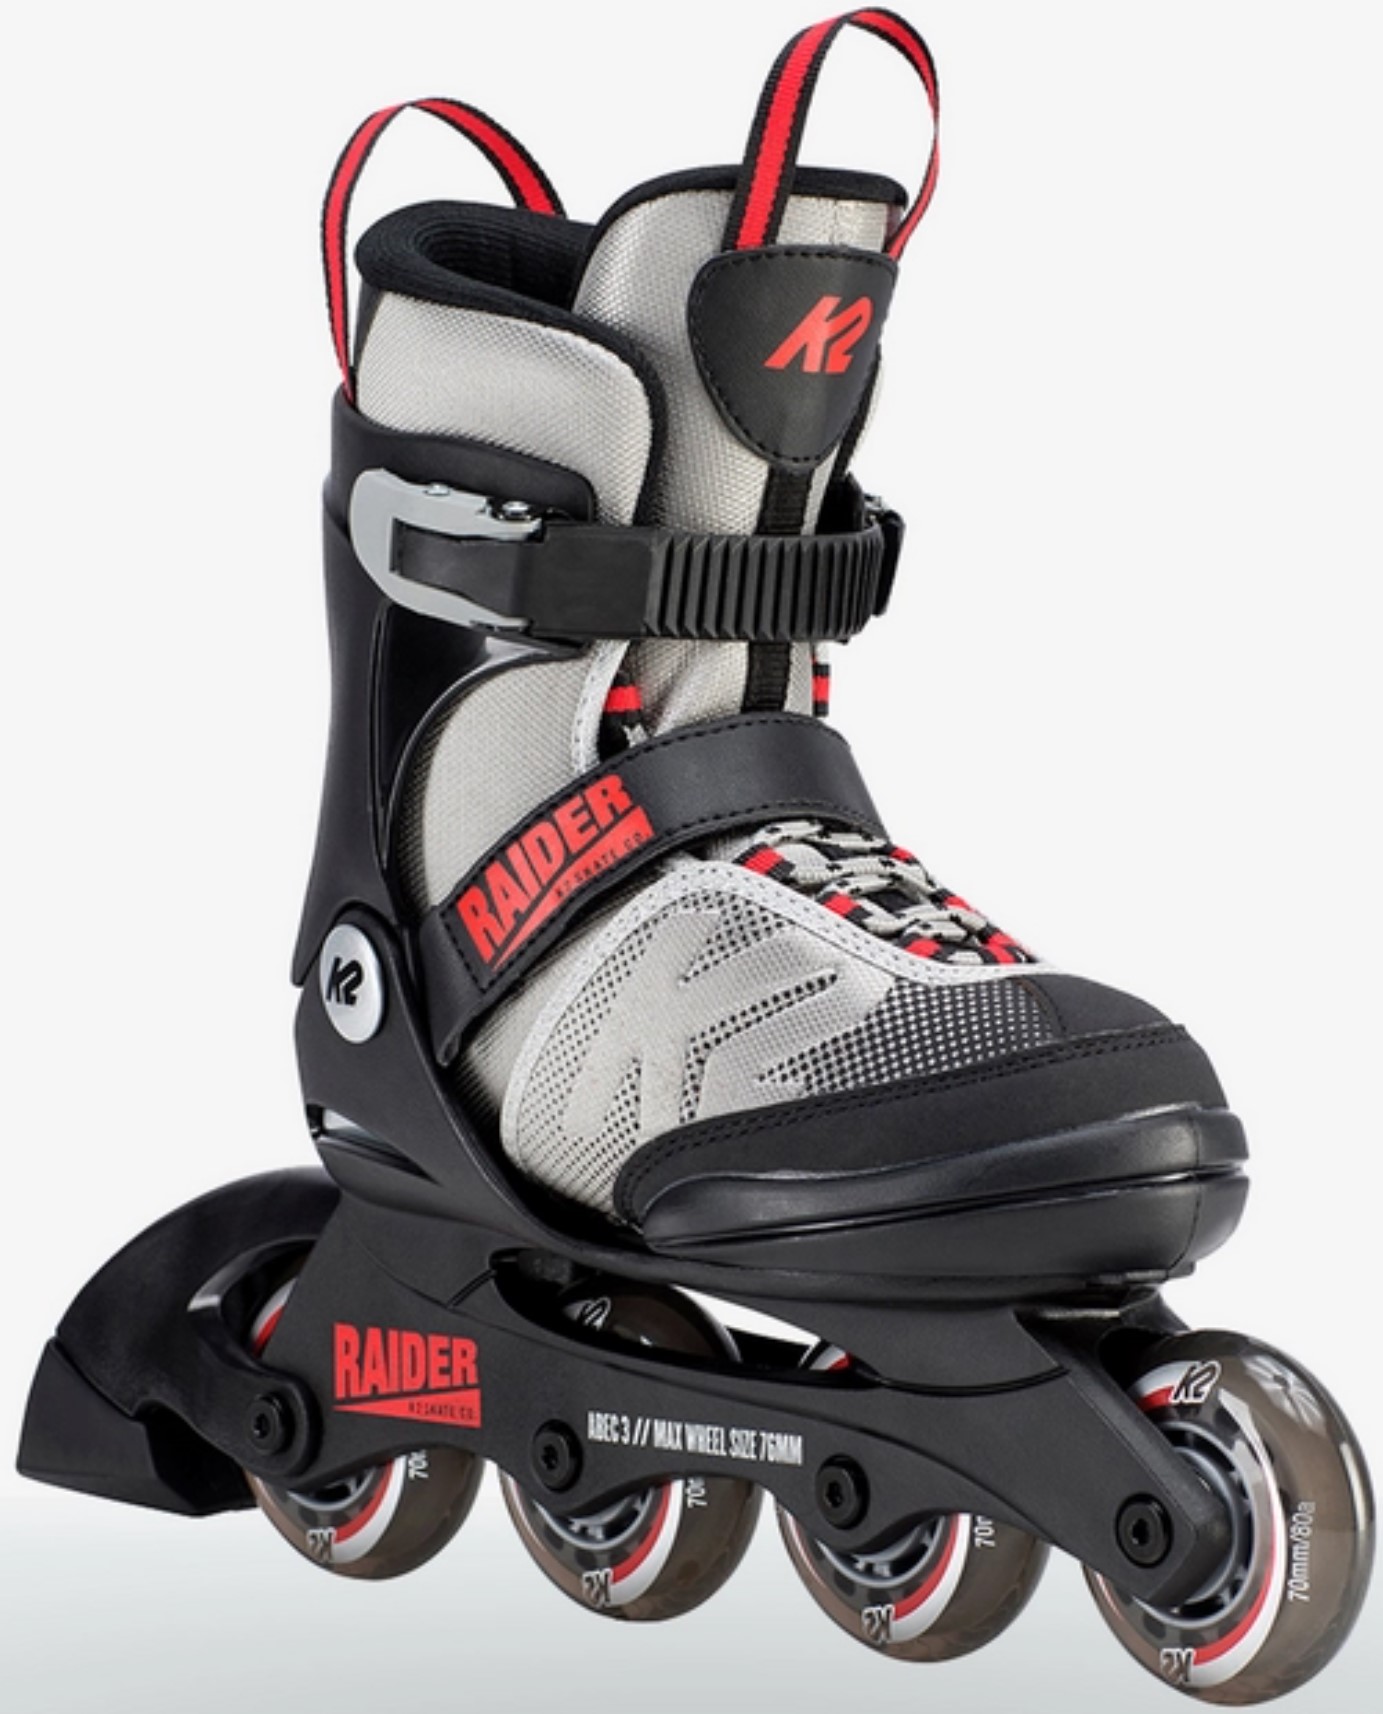 K2 Youth Skate Raider with four wheels and red colour touch